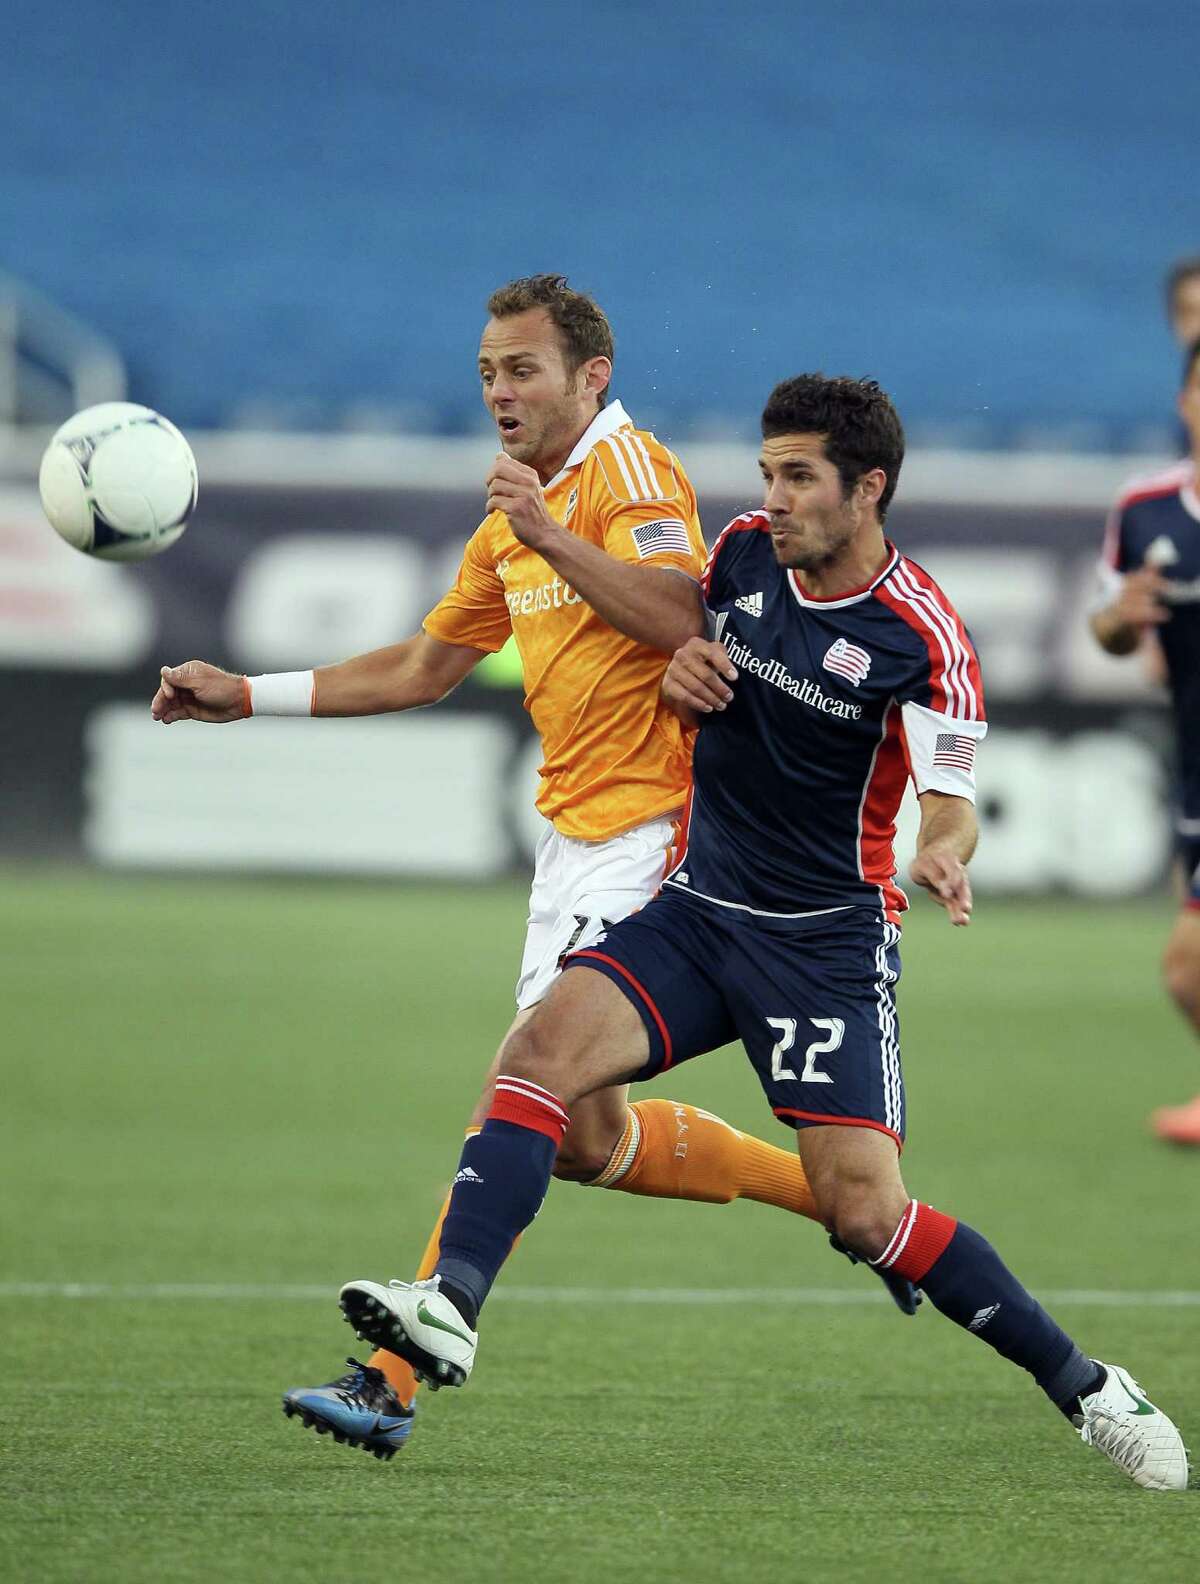 FOXBORO, MA - MAY 19: Brad Davis #11 of the Houston Dynamo and Benny Feilhaber #22 of the New England Revolution fight for the ball in the first half on May 19, 2012 at Gillette Stadium in Foxboro, Massachusetts.